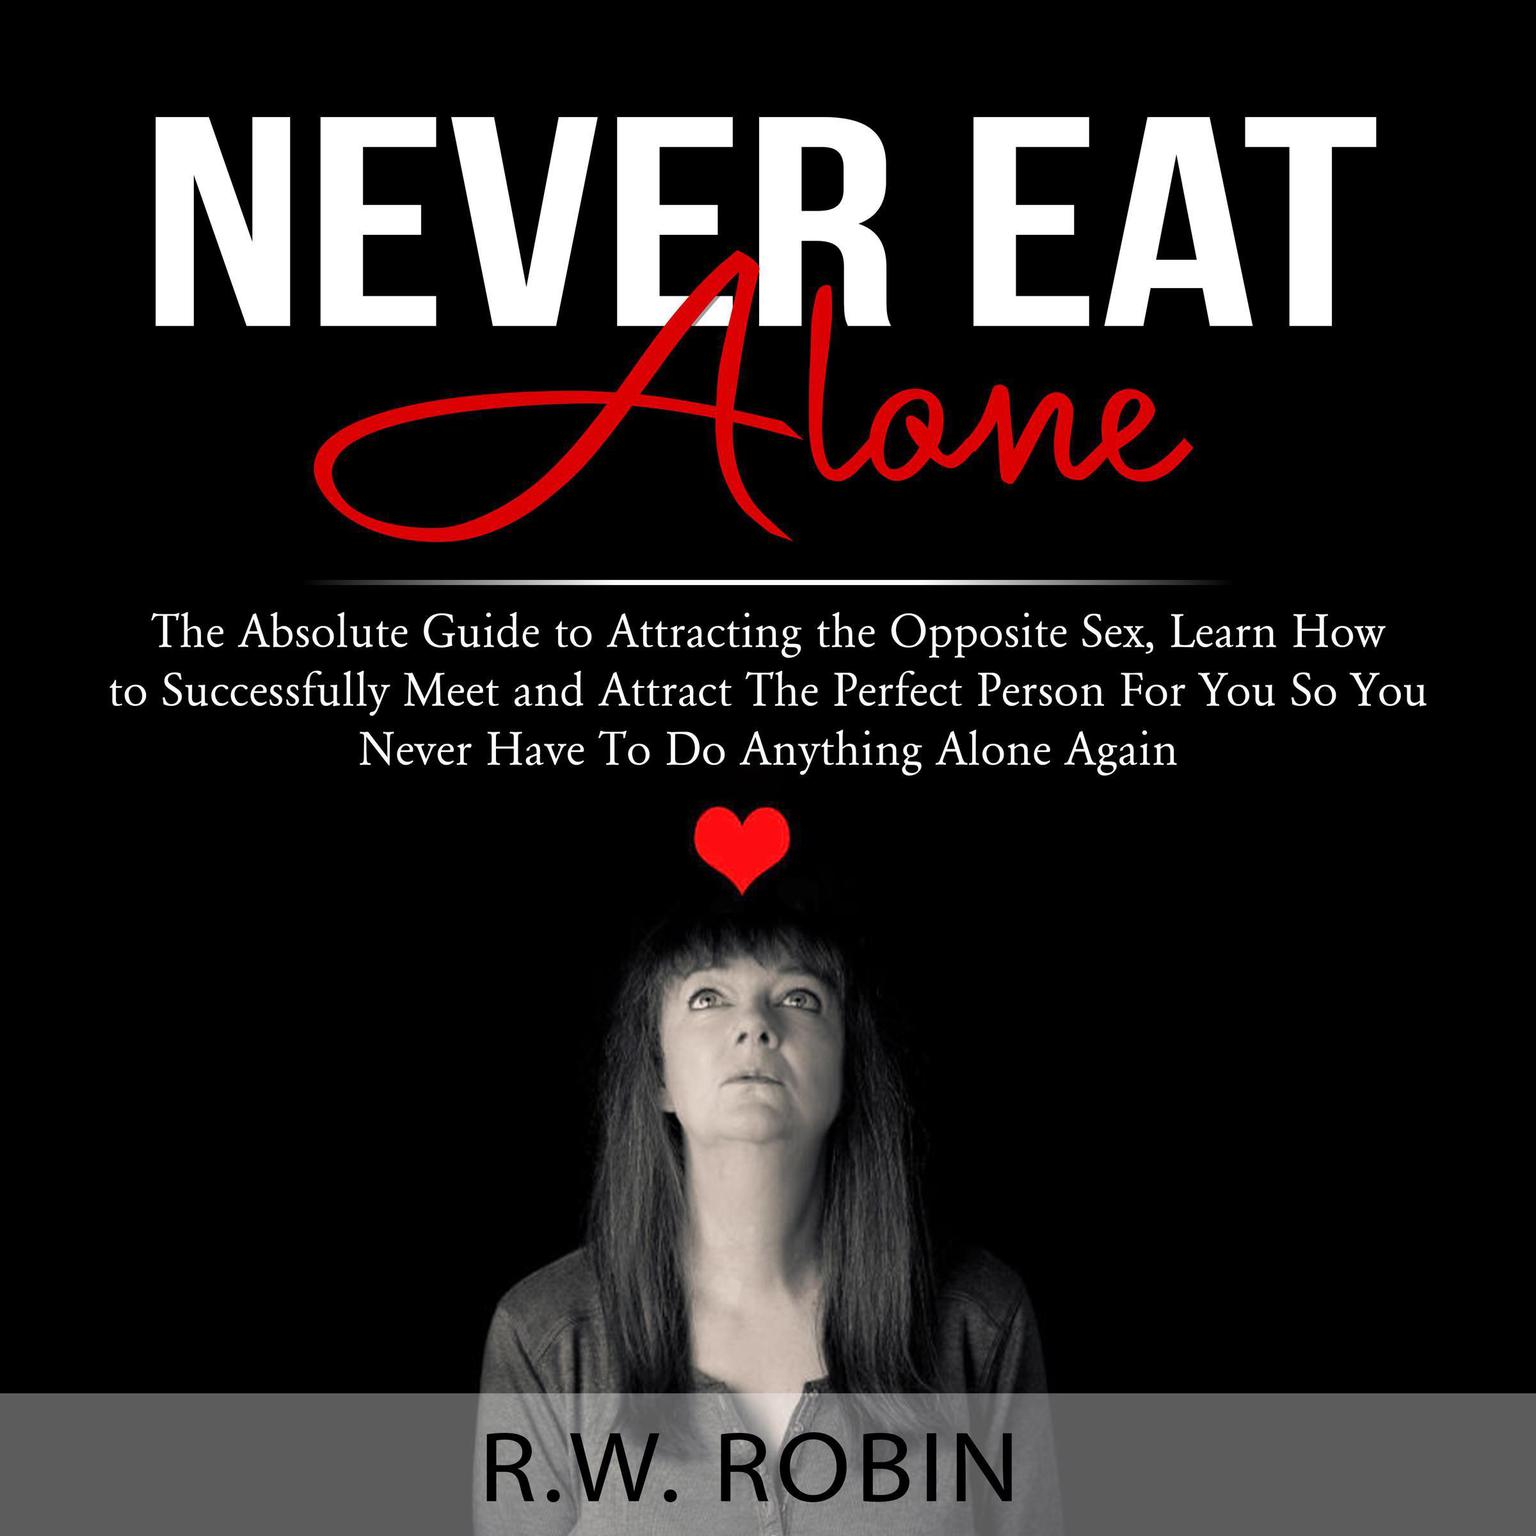 Never Eat Alone: The Absolute Guide to Attracting the Opposite Sex, Learn How to Successfully Meet and Attract The Perfect Person For You So You Never Have To Do Anything Alone Again Audiobook, by R.W. Robin